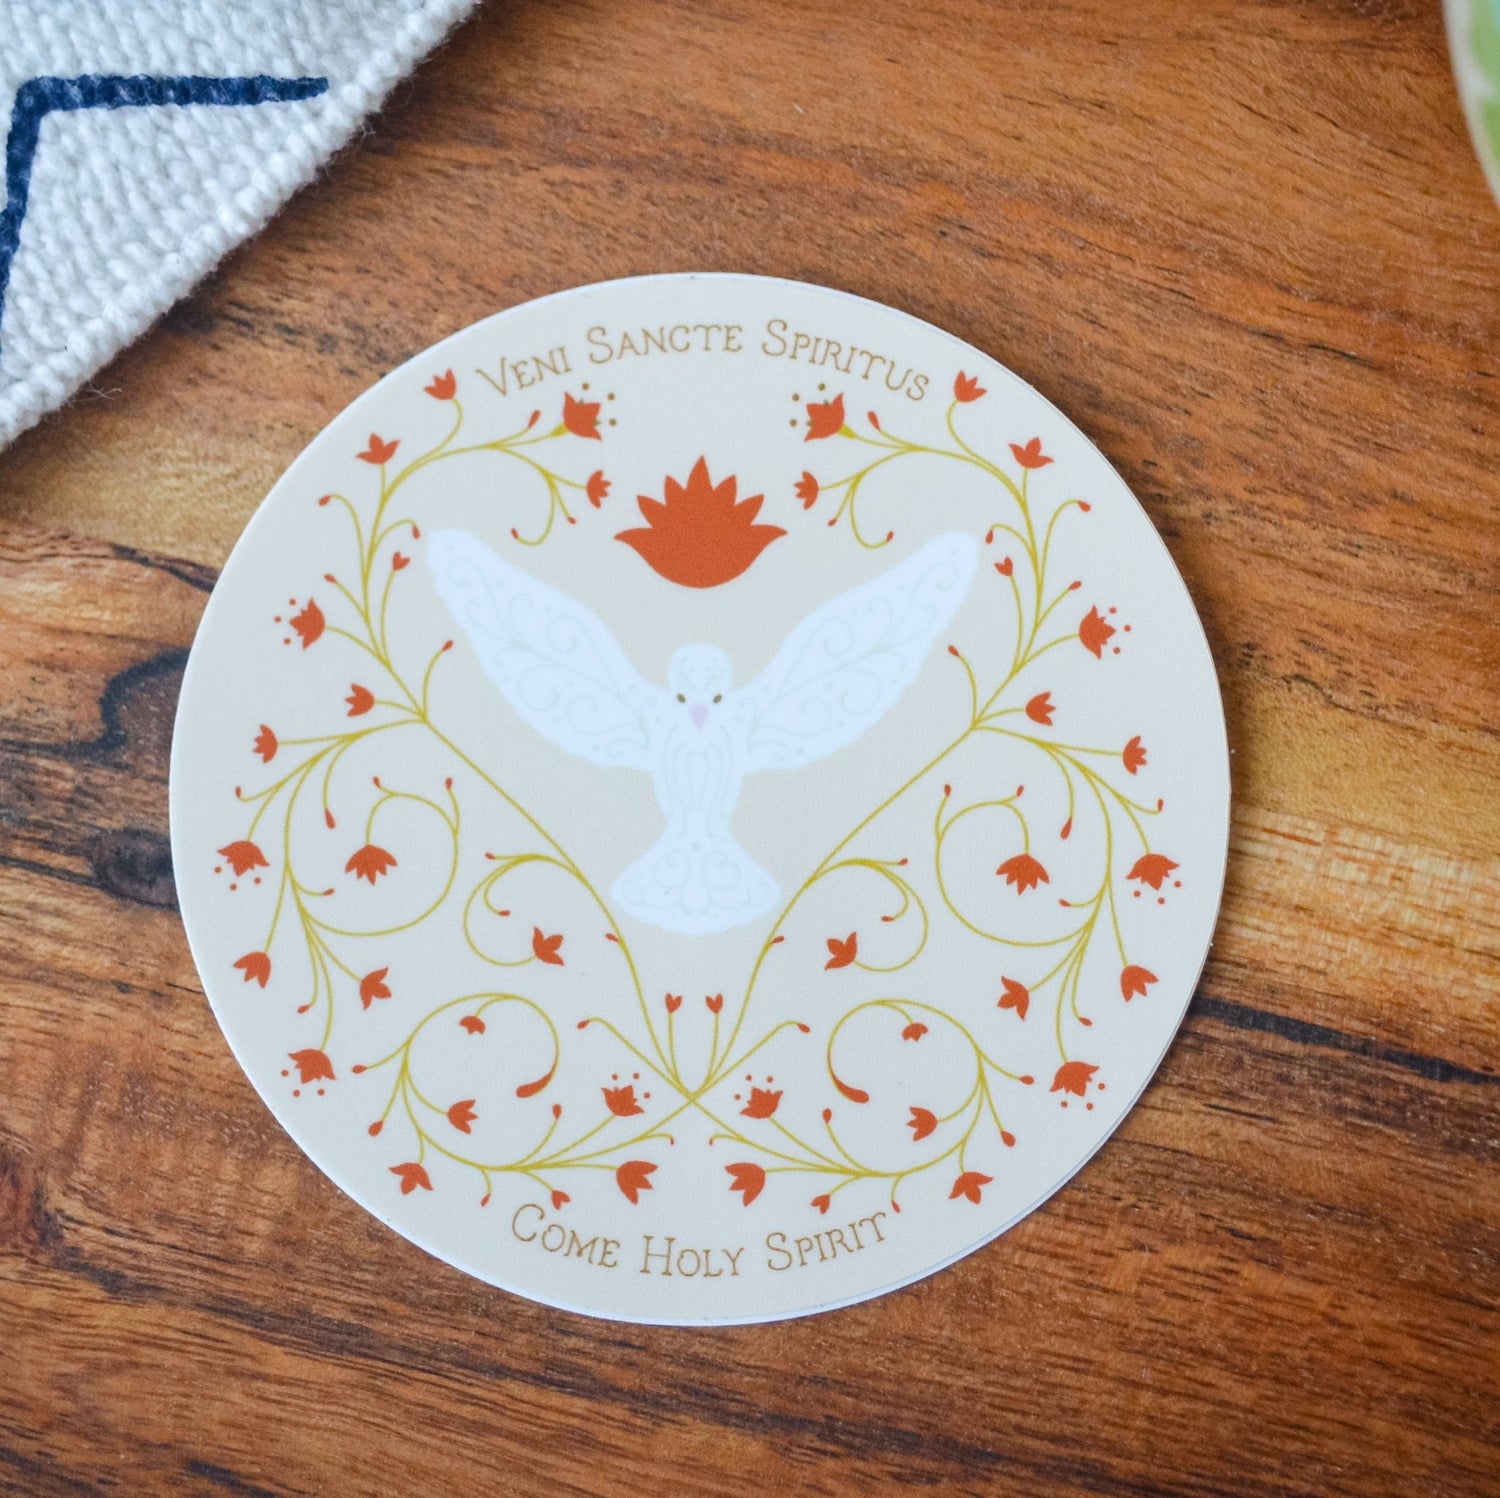 Confirmation Gifts - Little Way Design Co.